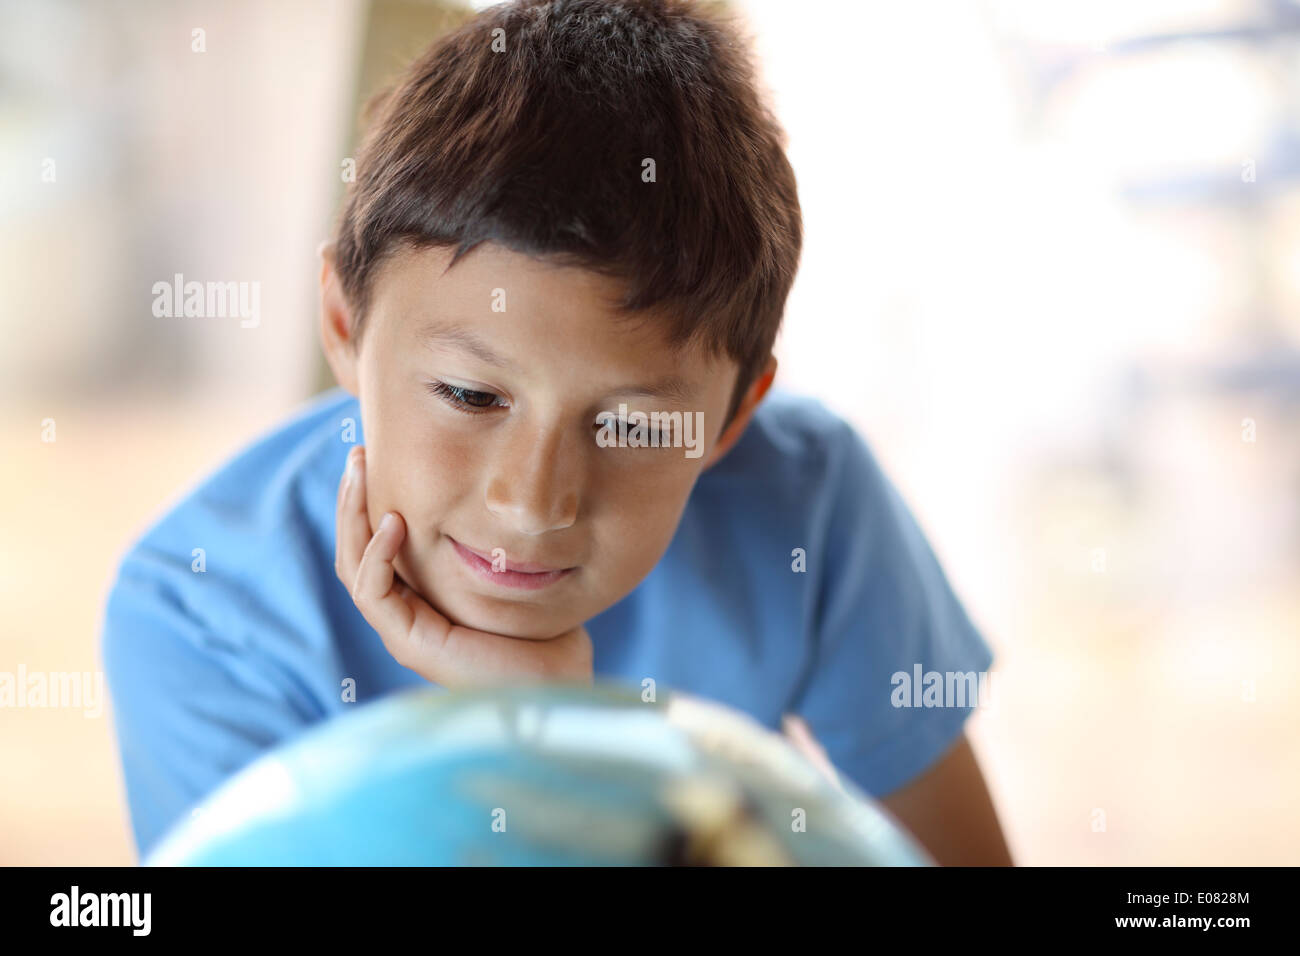 Y0oung boy dreams of traveling as he looks at a globe Stock Photo